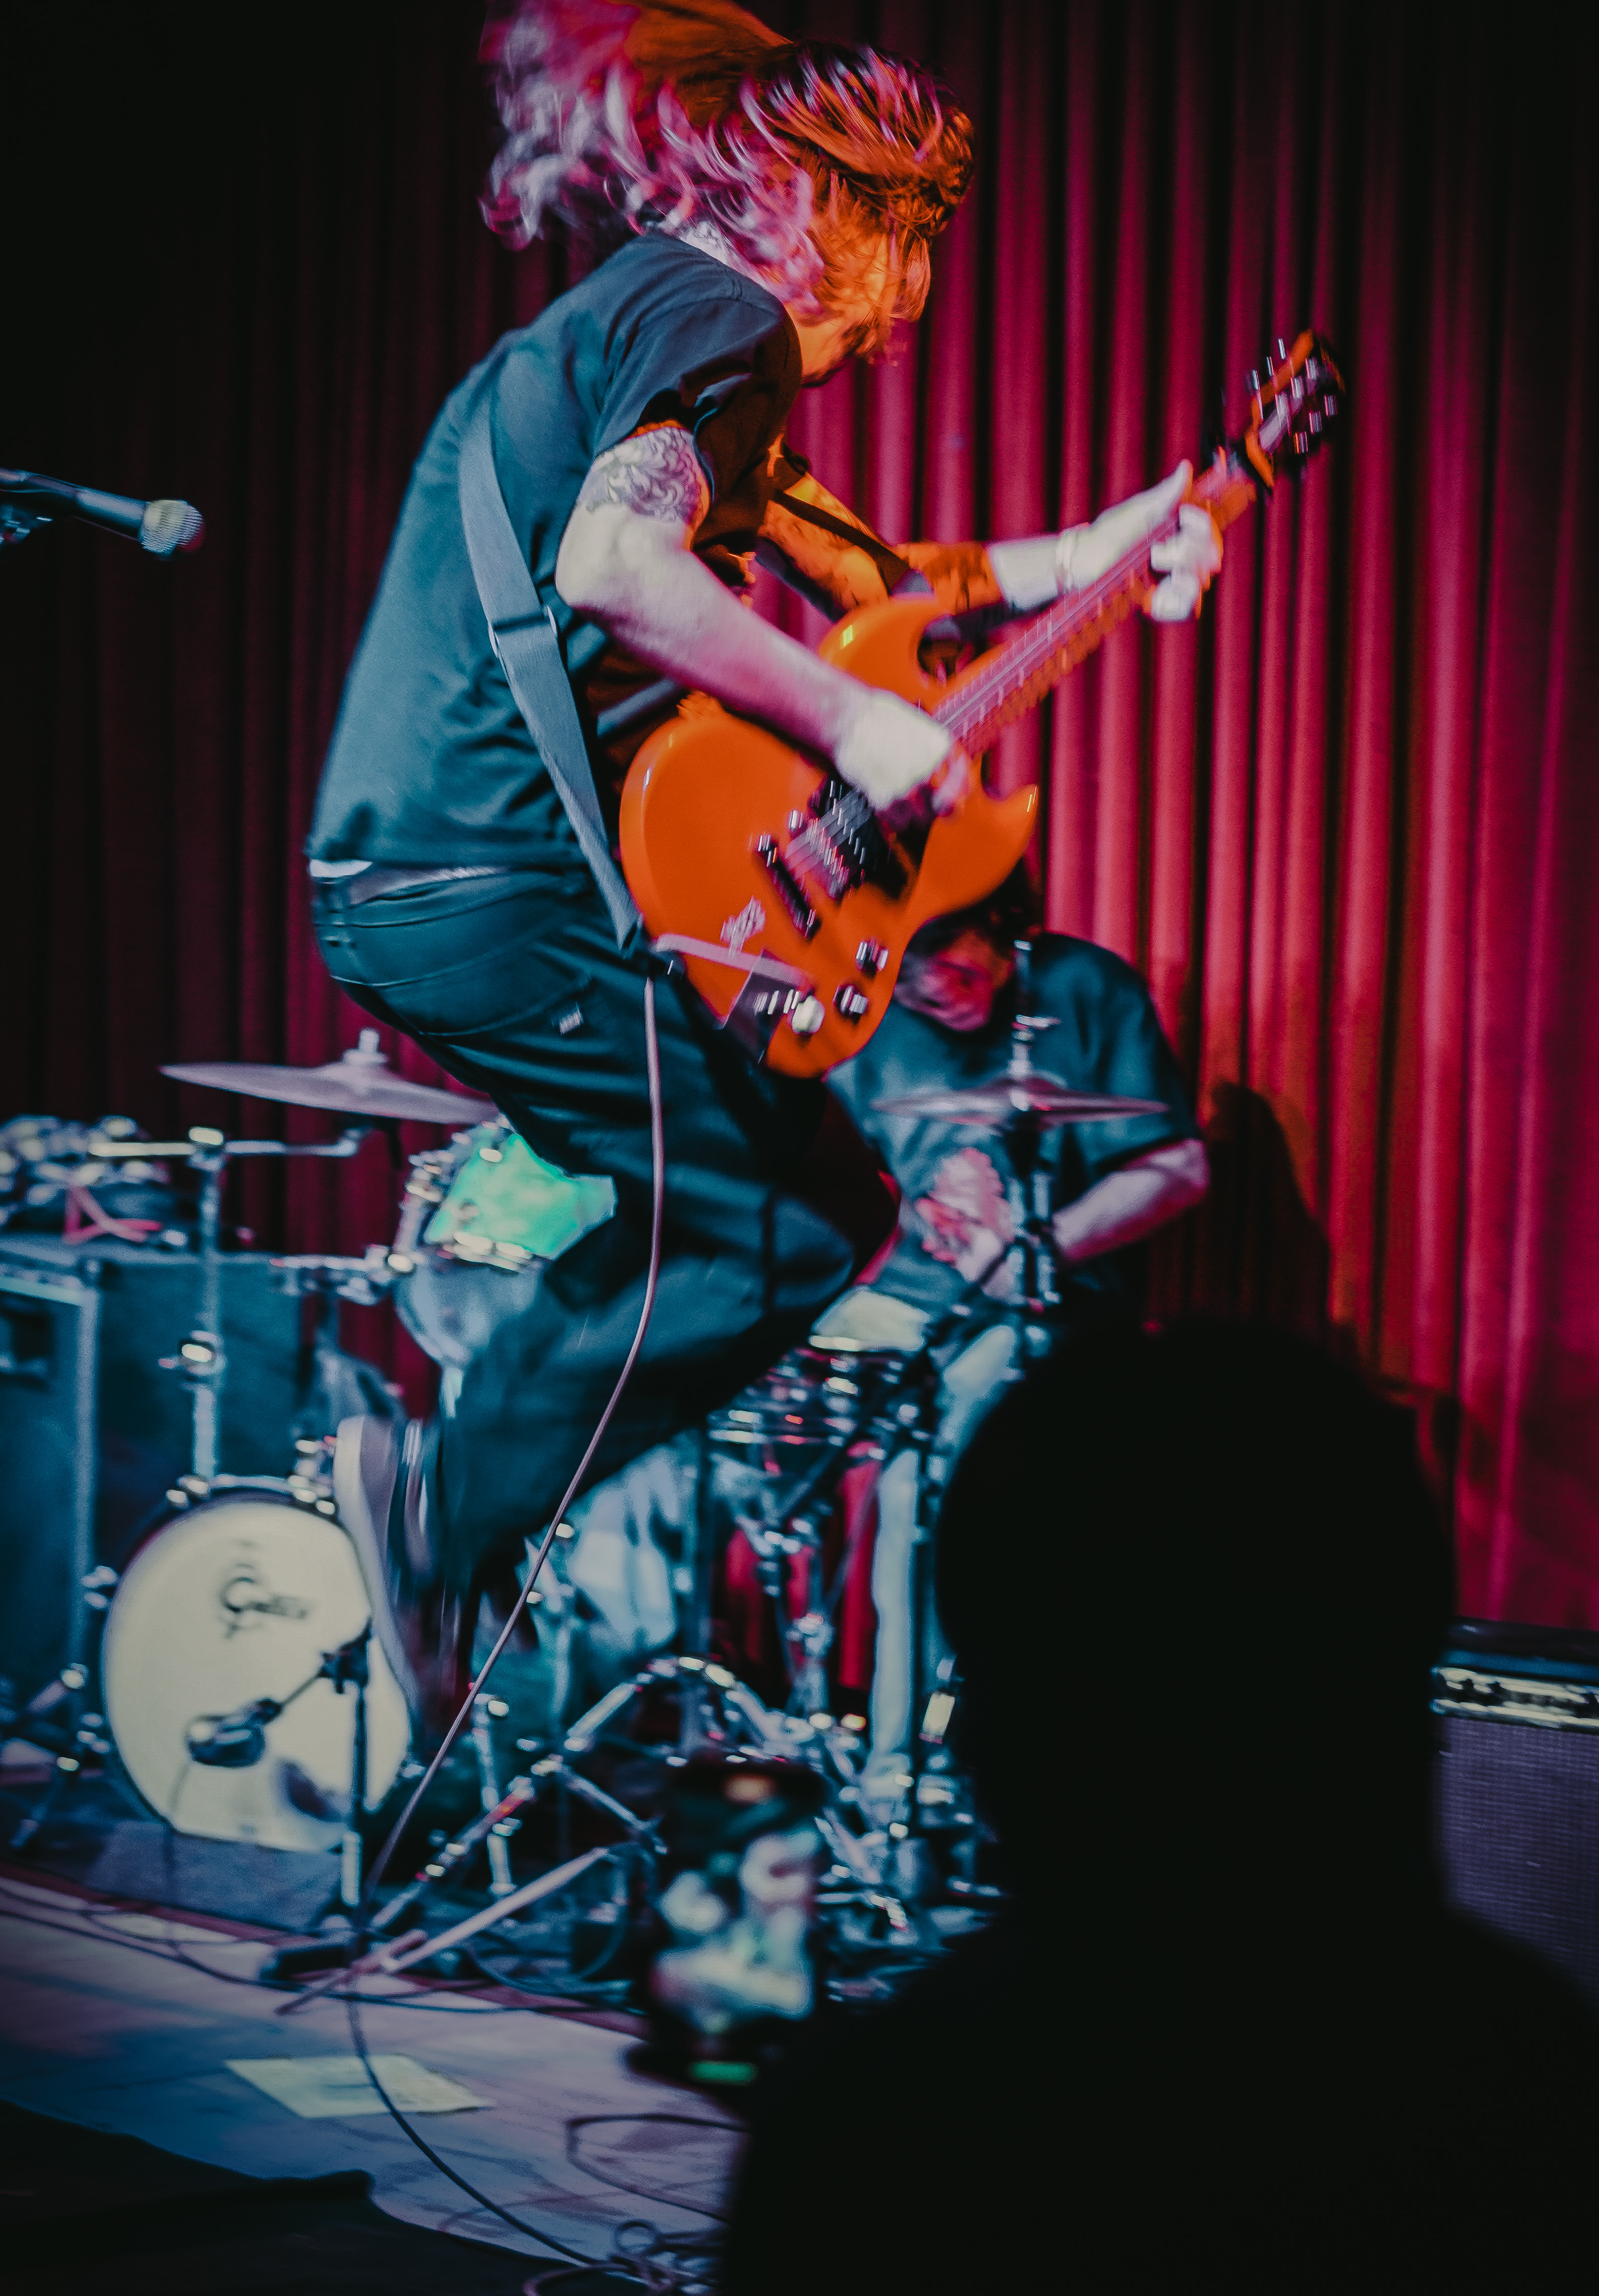 A guitarist jumping in the air